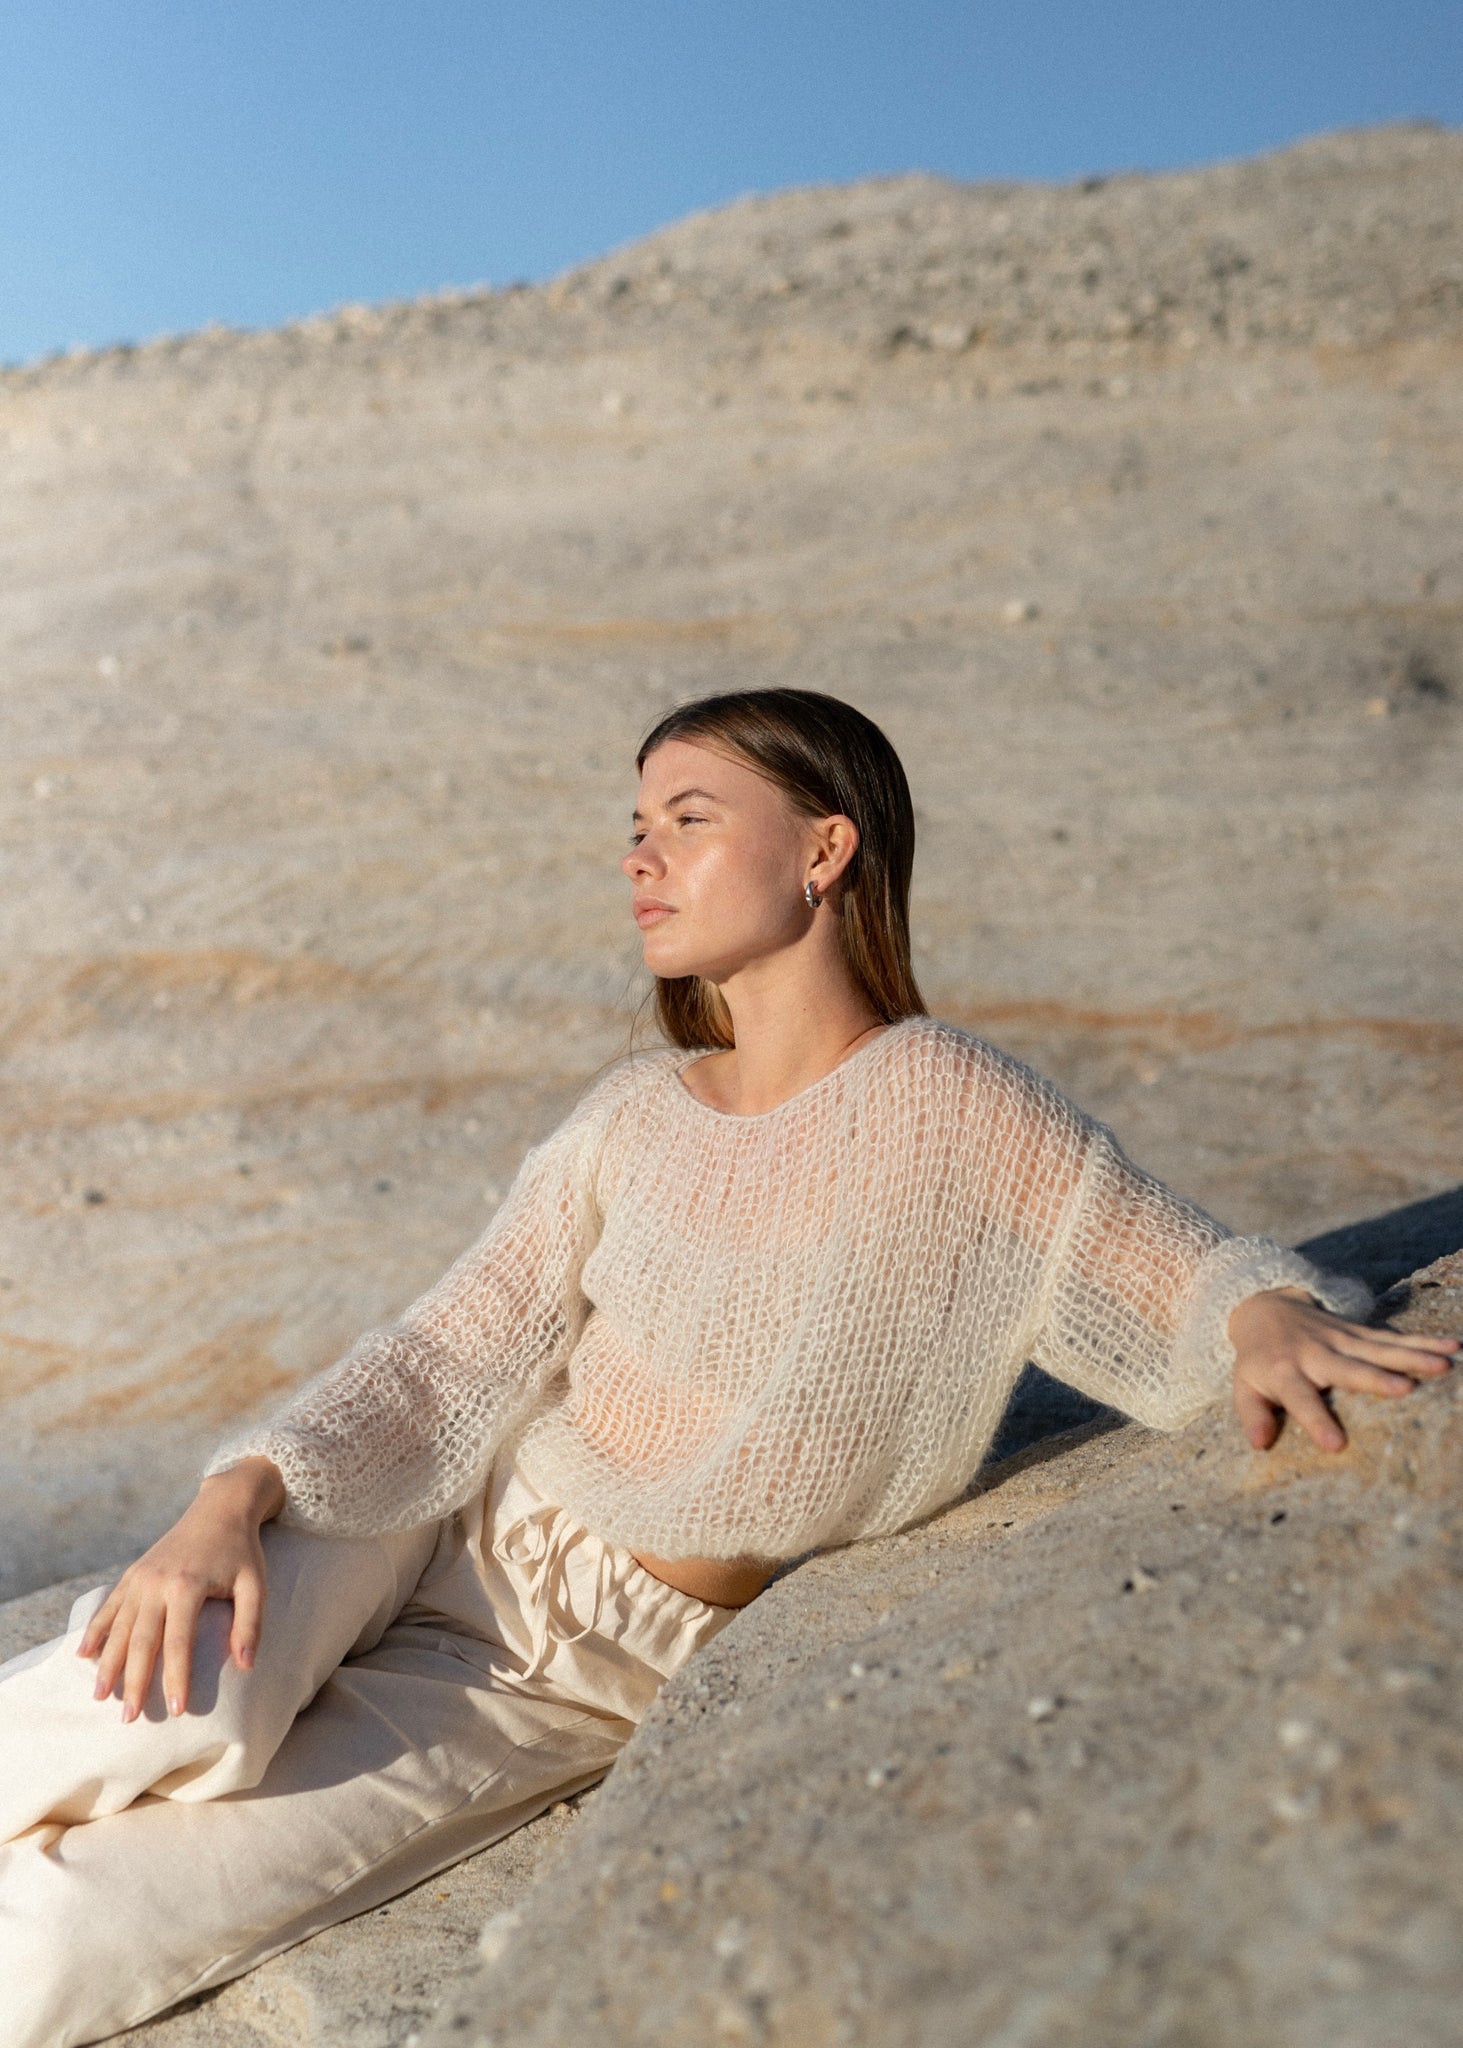 Delicate Mohair Sweater